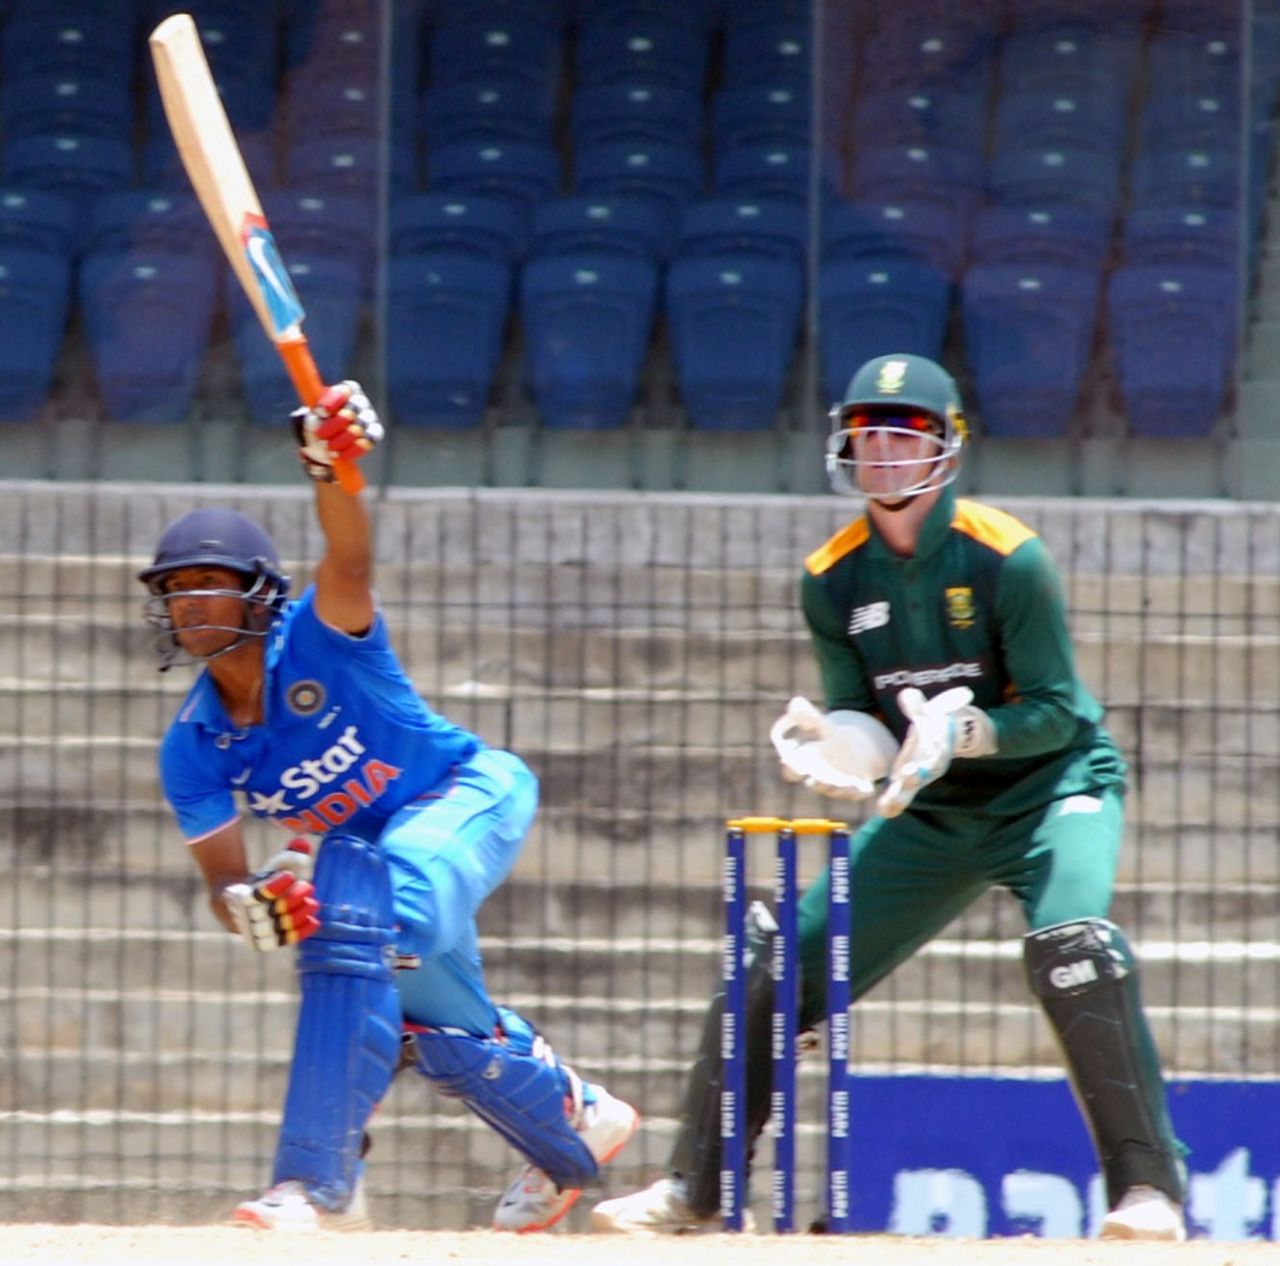 Mayank Agarwal goes one-handed, India v South Africa, A-team tri-series, August 13, 2015